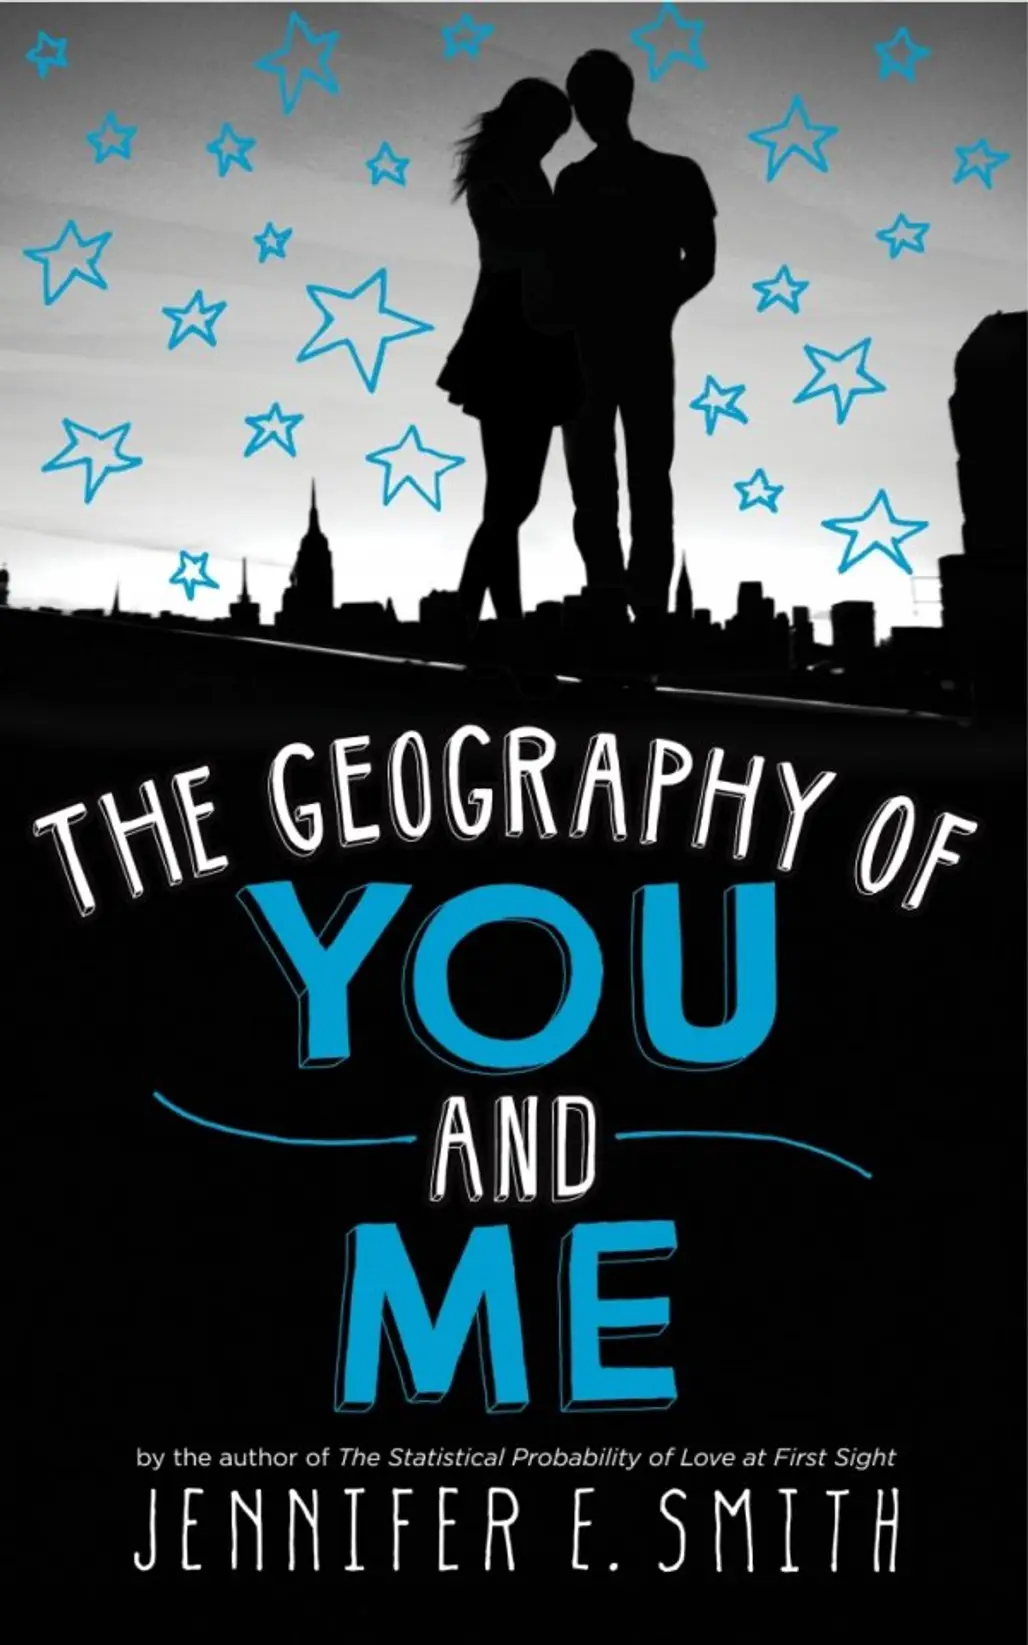 ‘the Geography of You and Me”